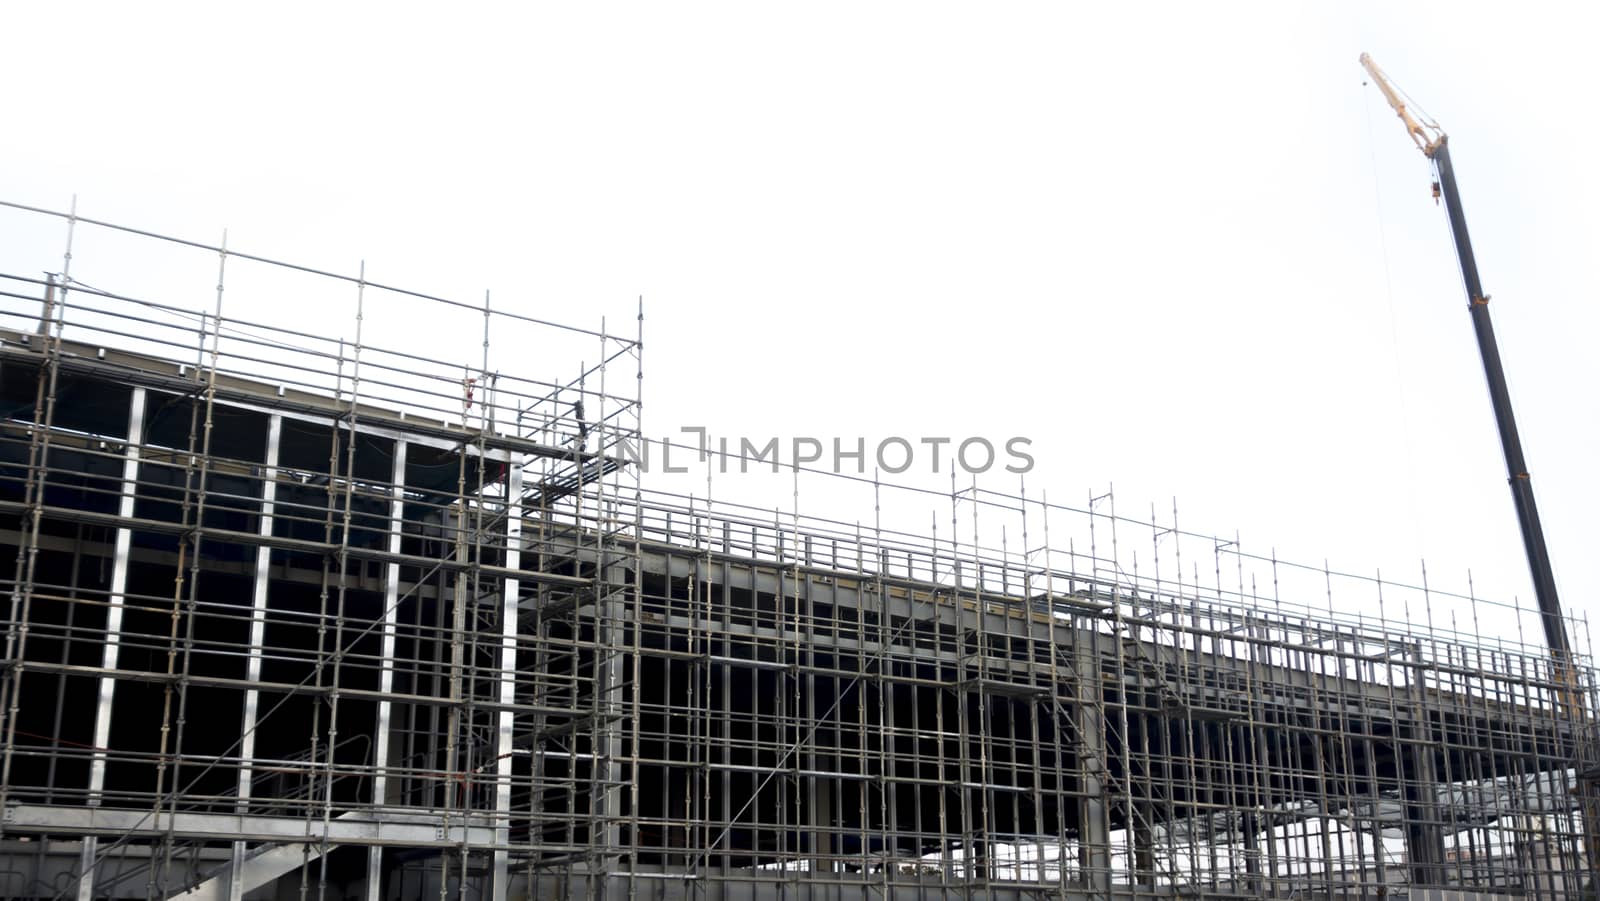 Construction building with Scaffolding around the building and H by Kingsman911